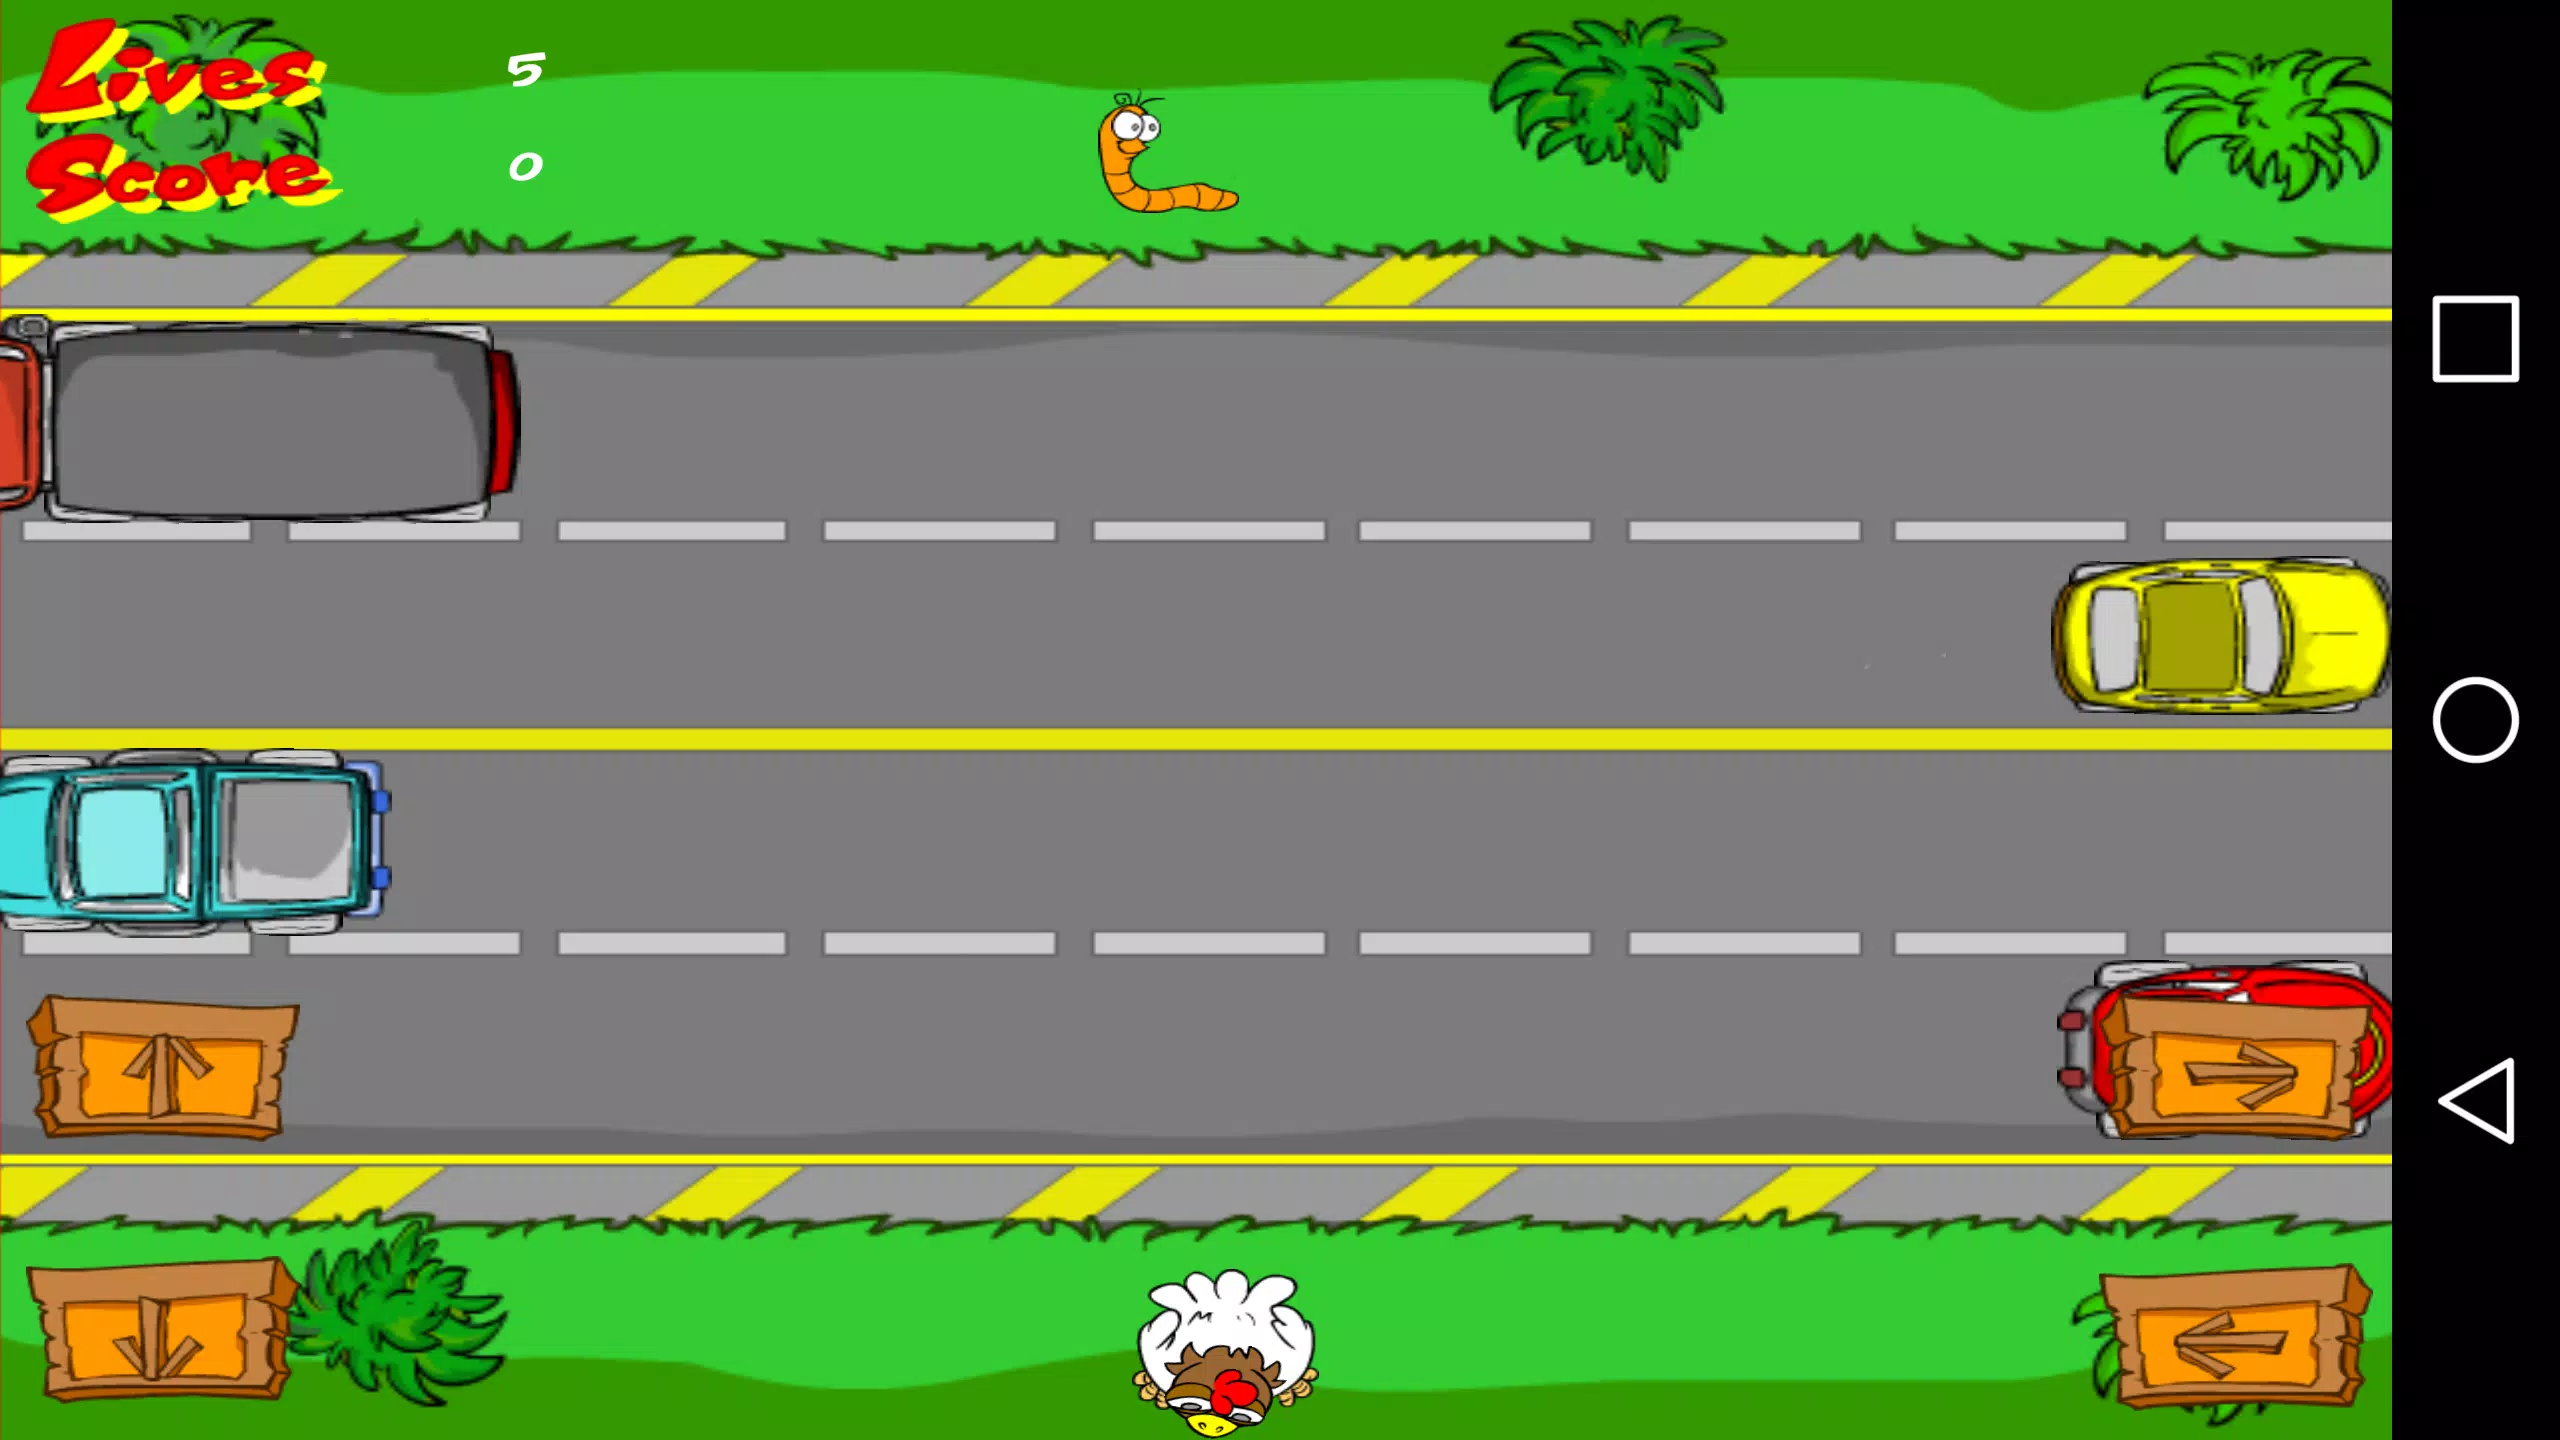 PDF] When Should the Chicken Cross the Road? - Game Theory for